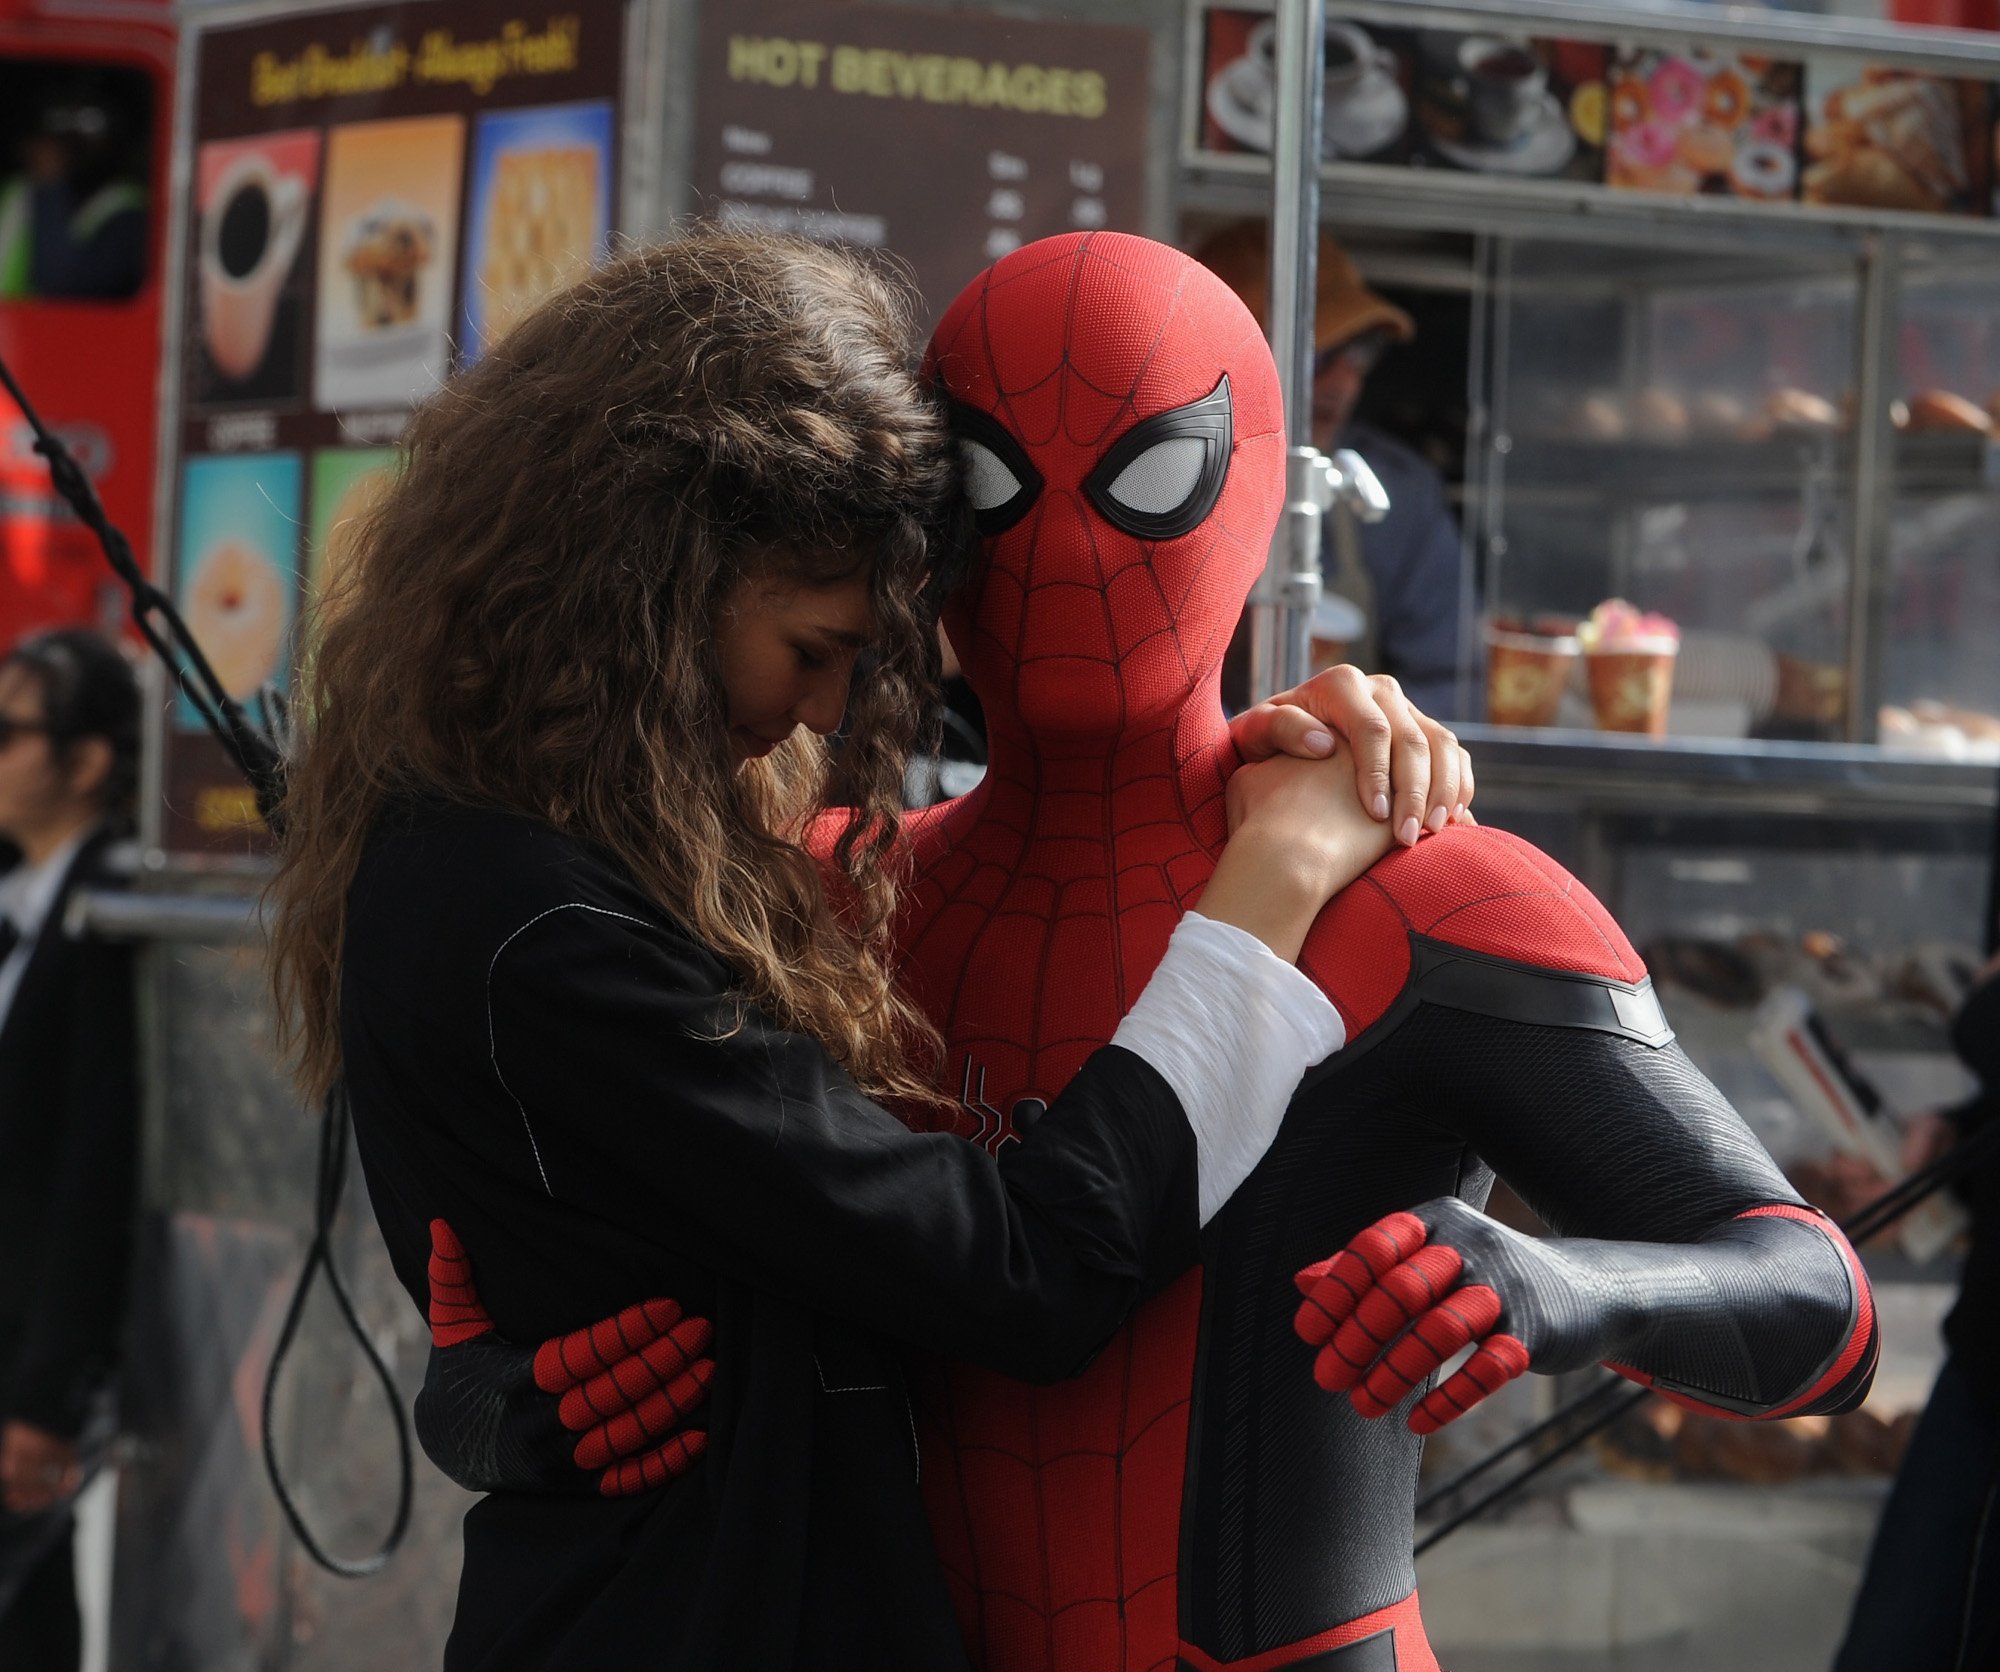 Tom Holland and Zendaya filming 'Spider-Man: Far From Home' in New York City. She's holding onto him and he's wearing the Spider-Man suit. Will the new 'Spider-Man' movies tie into the old ones?